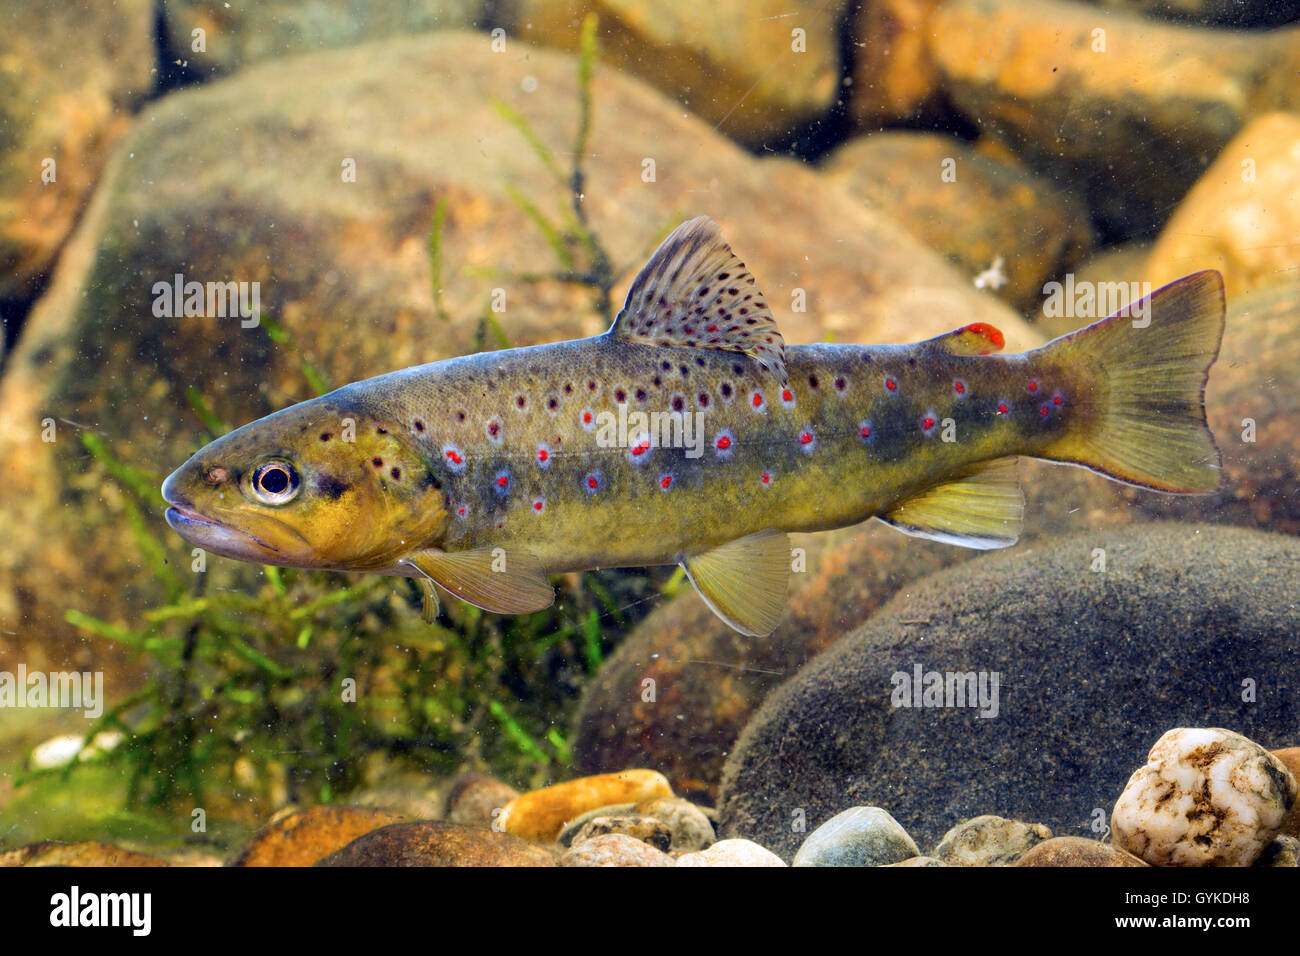 brown trout, river trout, brook trout (Salmo trutta fario), indigenous form from the Isen, Germany Stock Photo